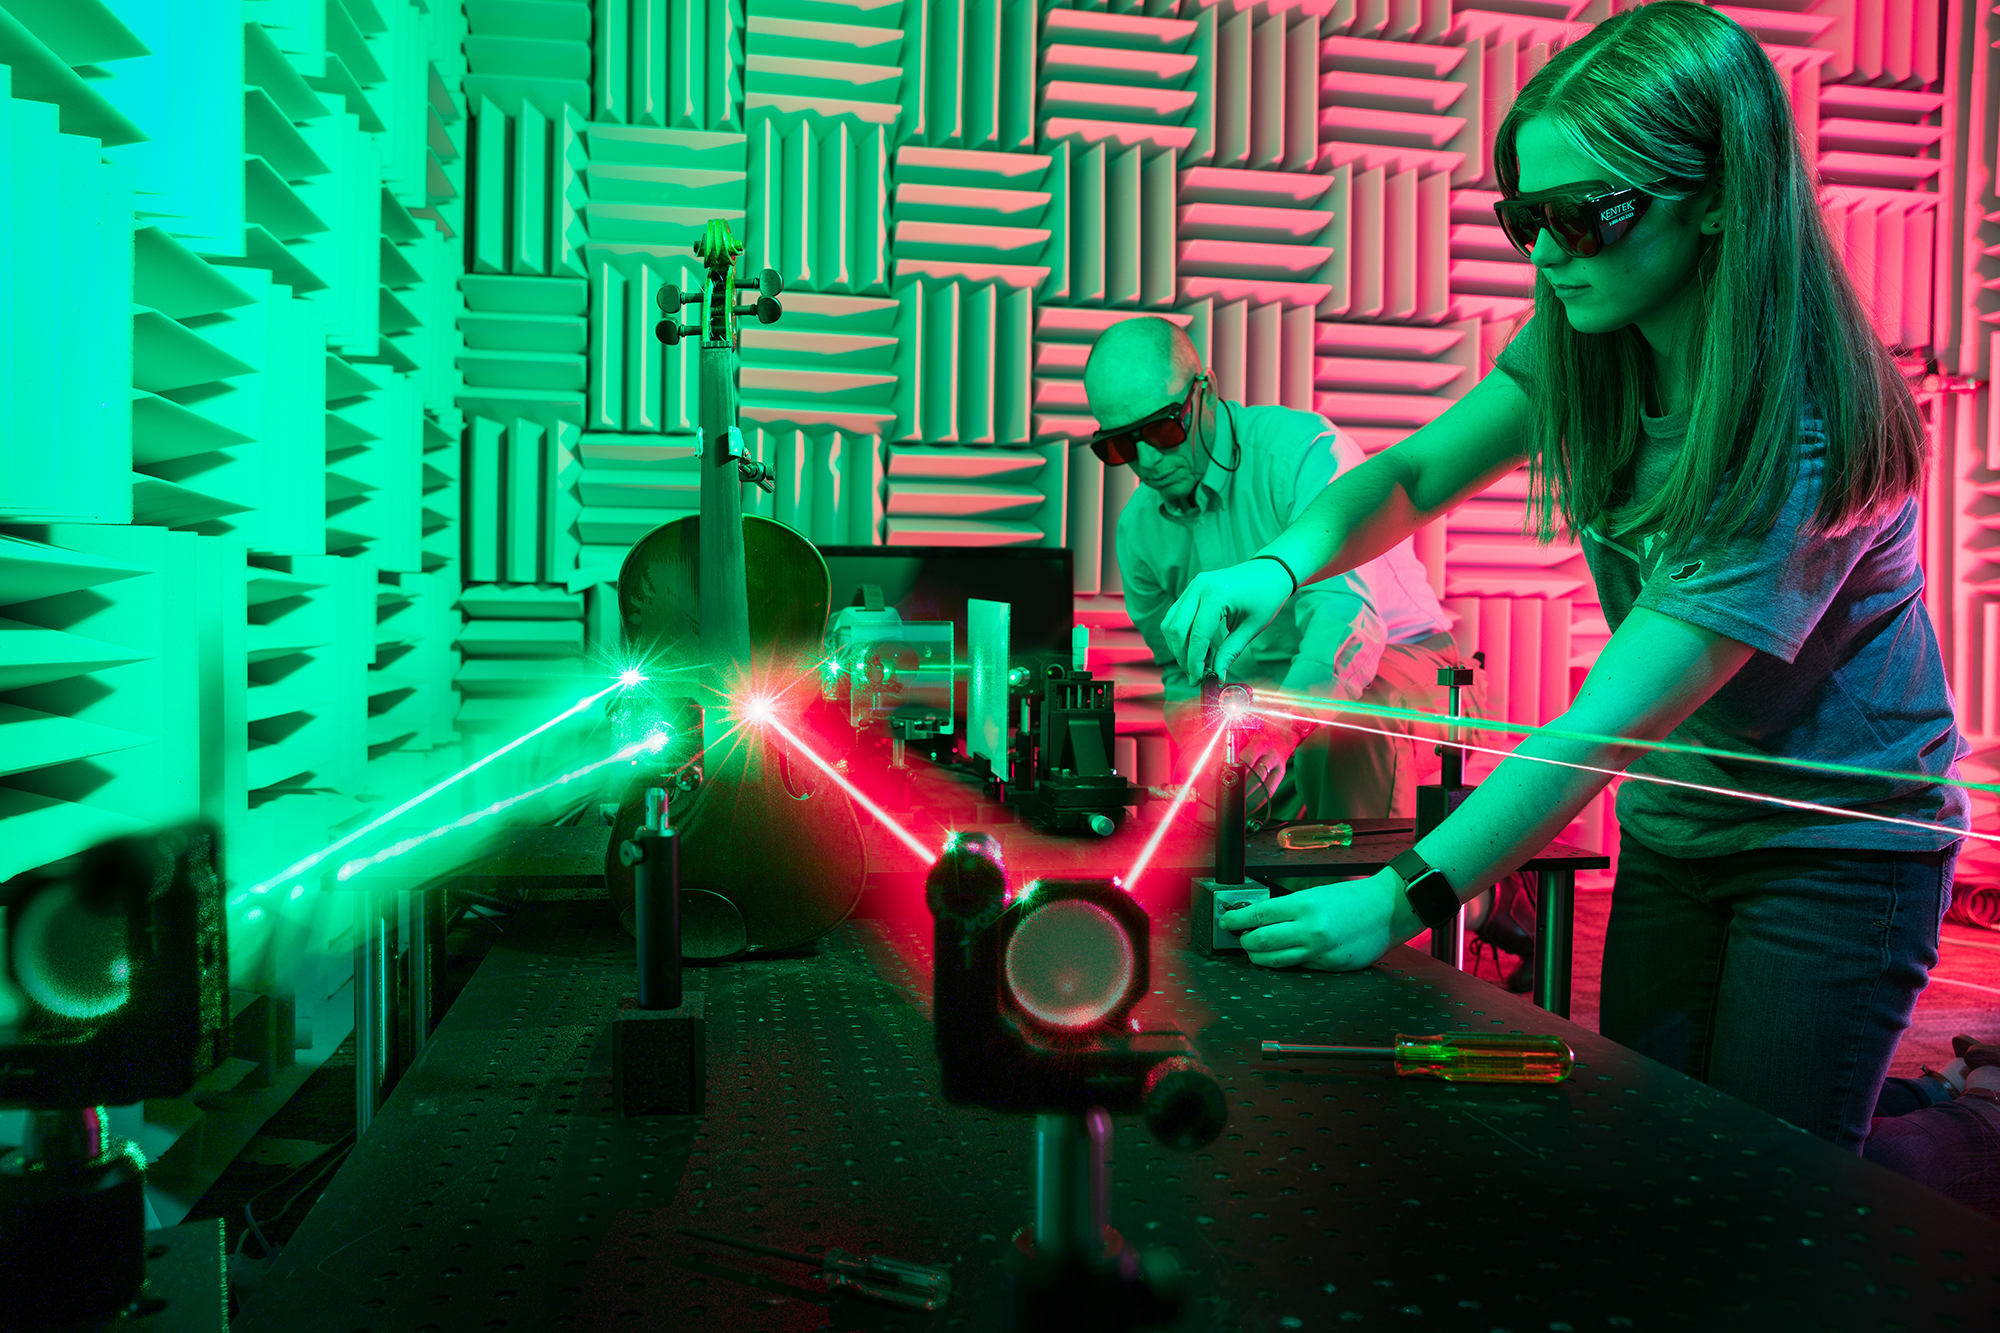 Studying music acoustics using lasers in physics professor Thomas Moore’s anechoic chamber lab.